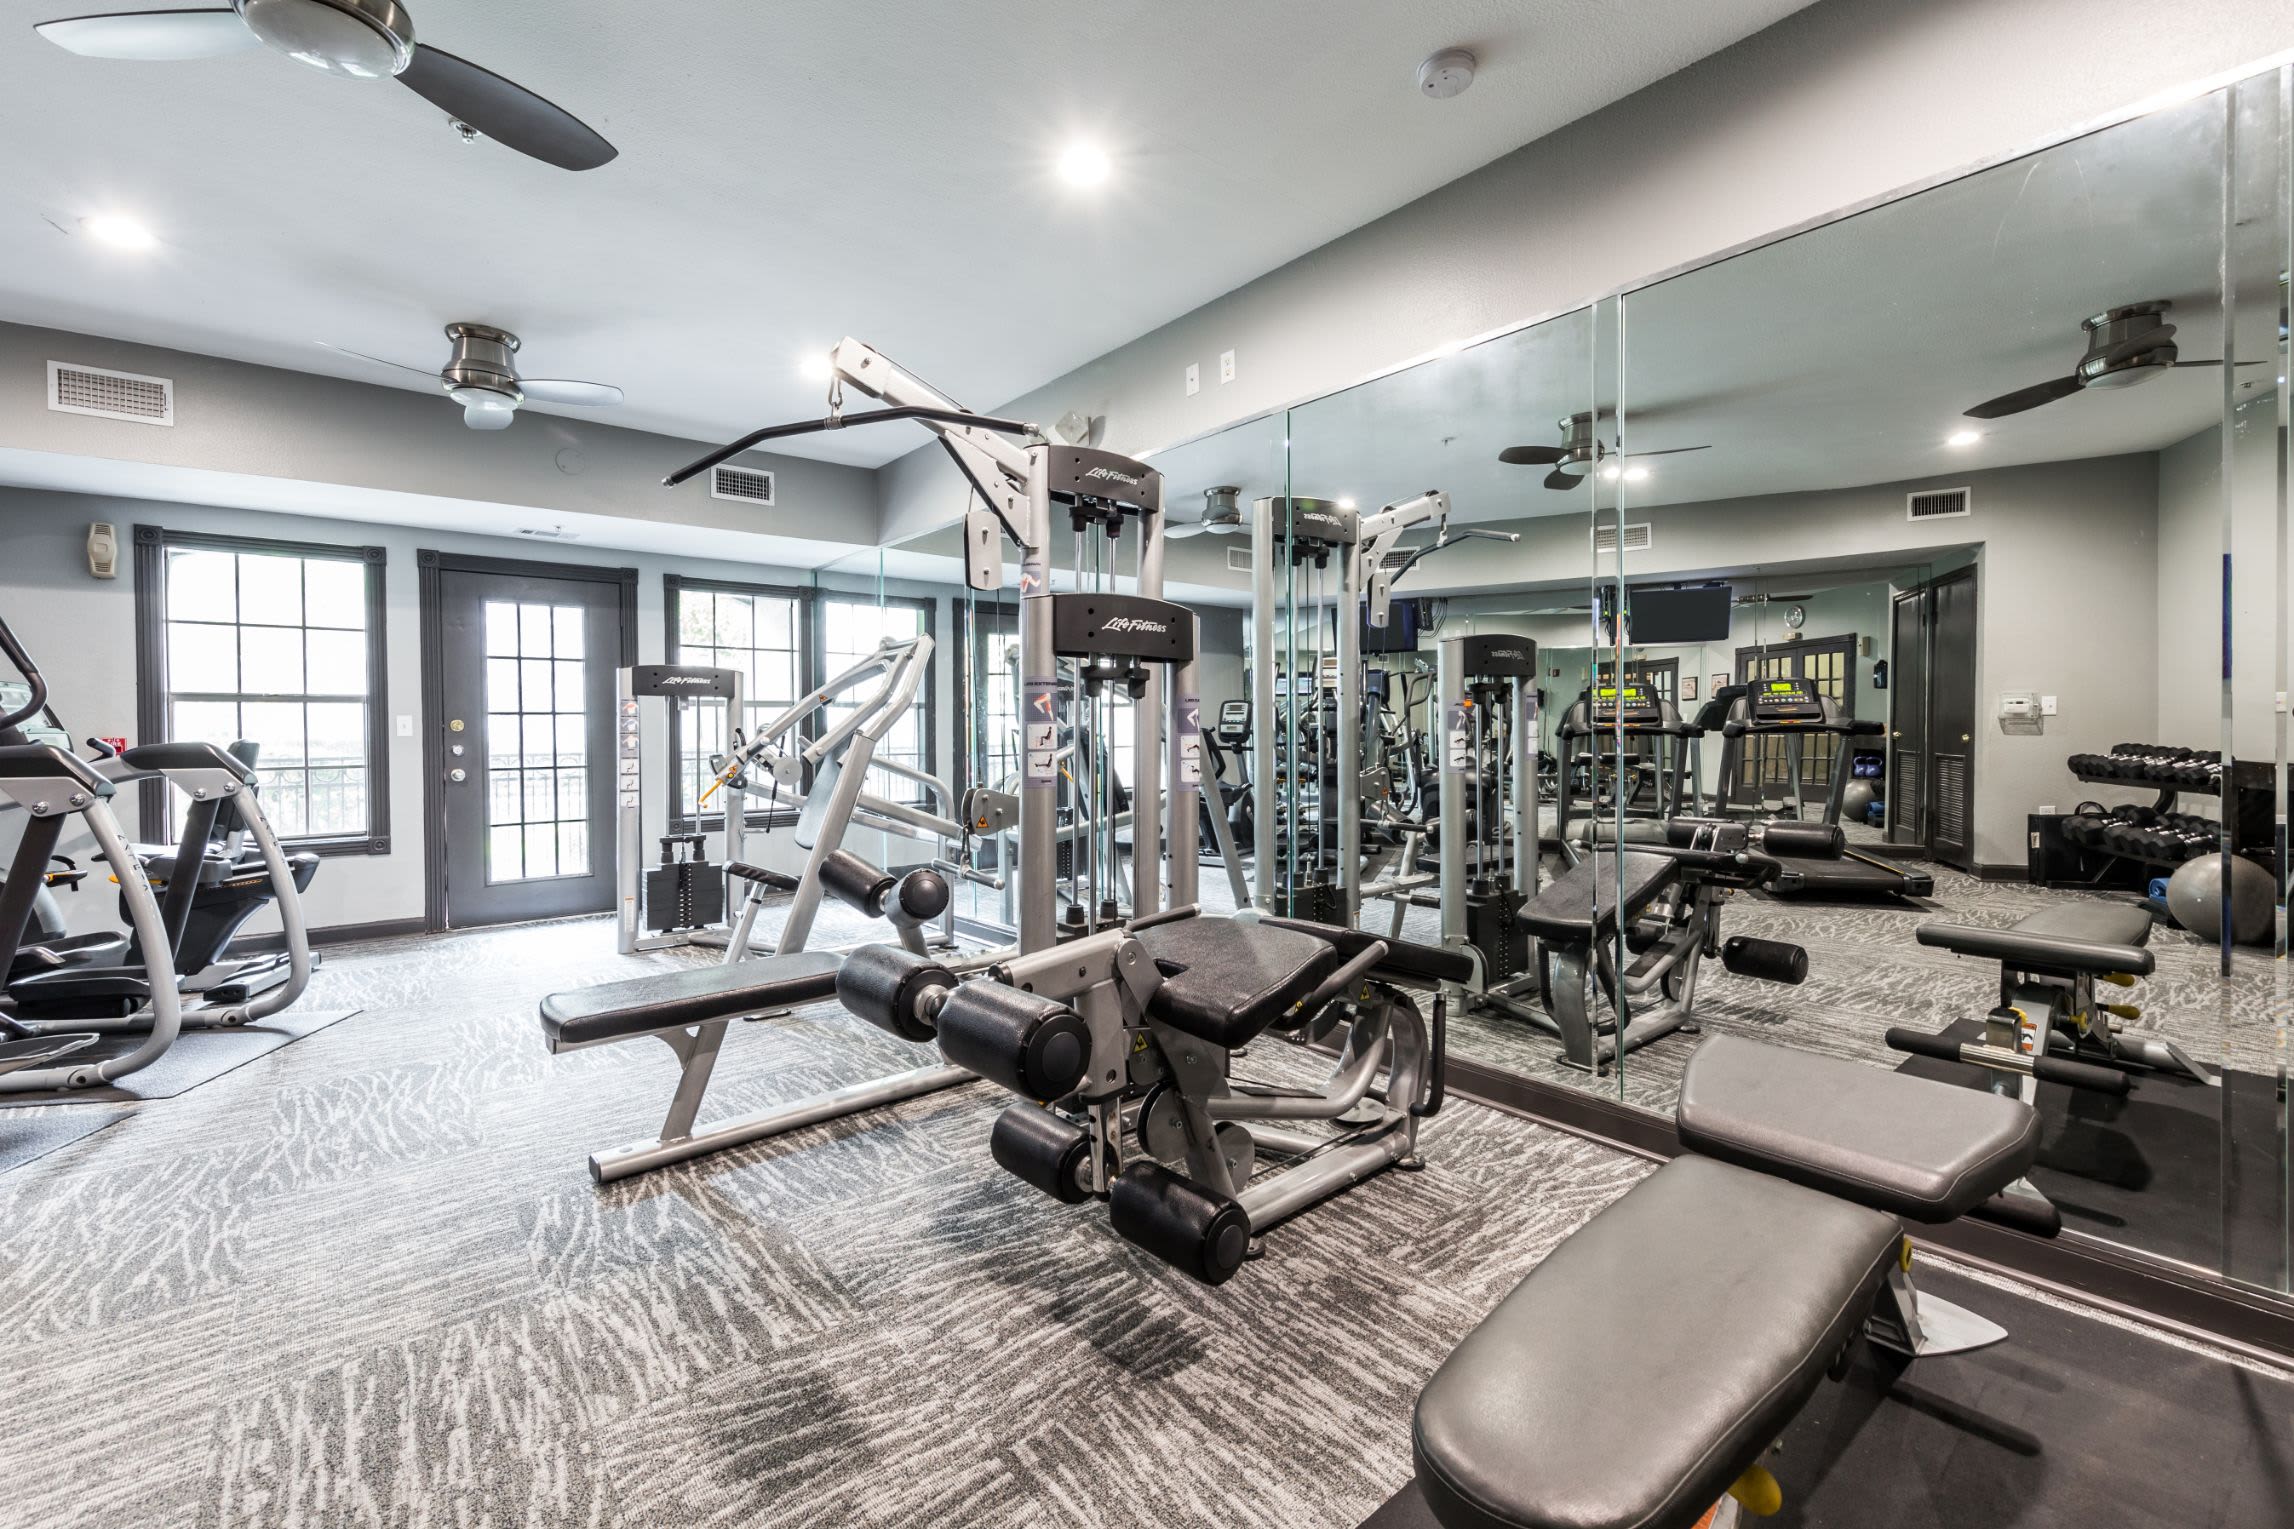 Machines and benches in the fitness center at Marquis at Tanglewood in Houston, Texas